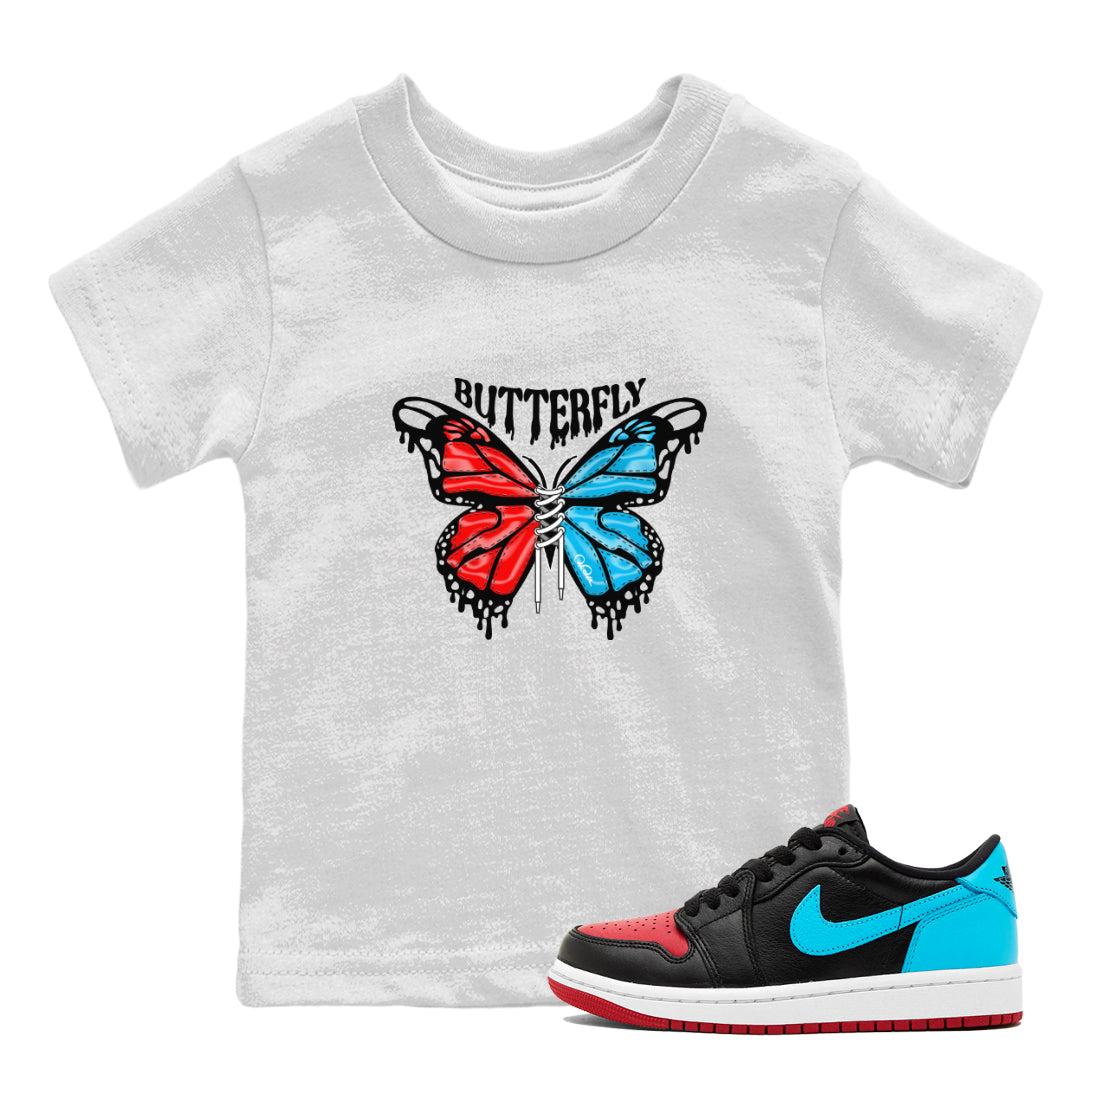 Air Jordan 1 UNC to Chicago Sneaker Match Tees Butterfly Streetwear Sneaker Shirt AJ1 UNC to Chicago Sneaker Release Tees Kids Shirts White 1